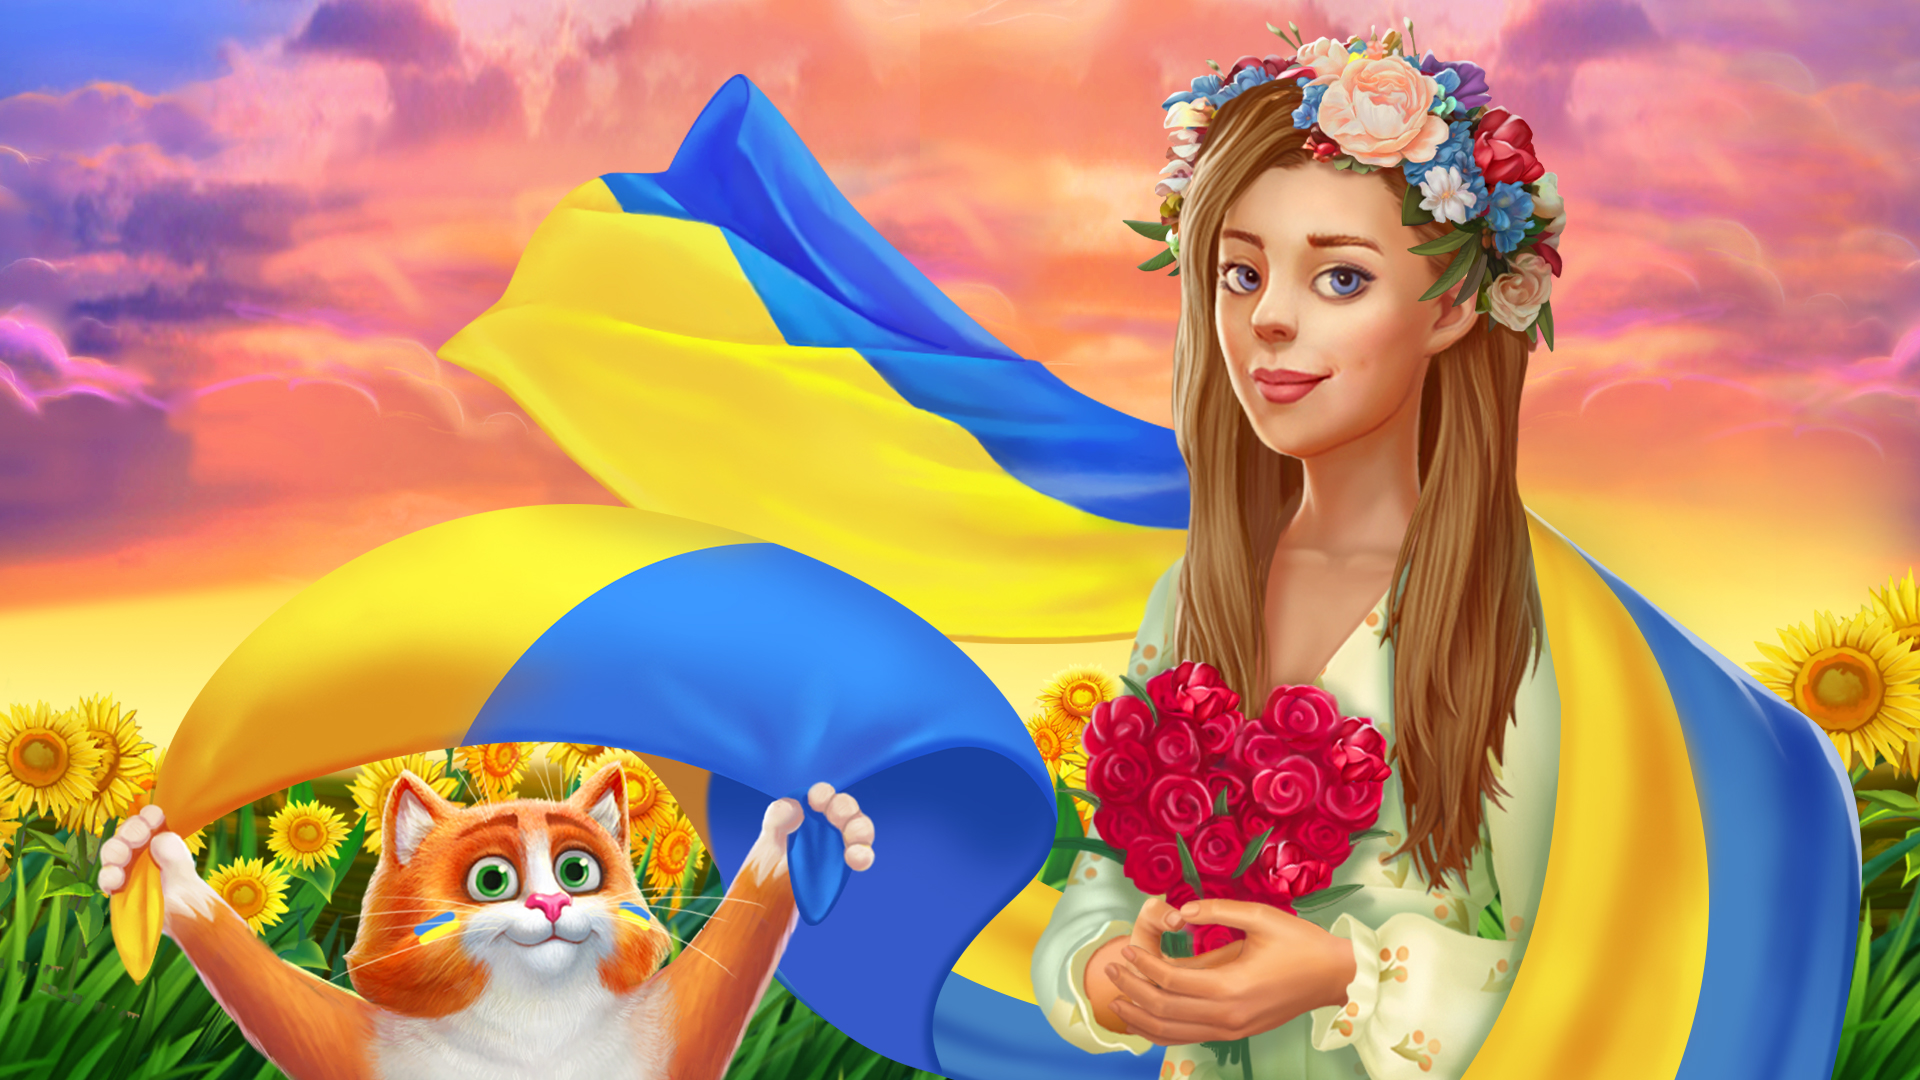 Love unites: VOKI Games launched a fundraiser for Ukraine in Manor Matters Image 0